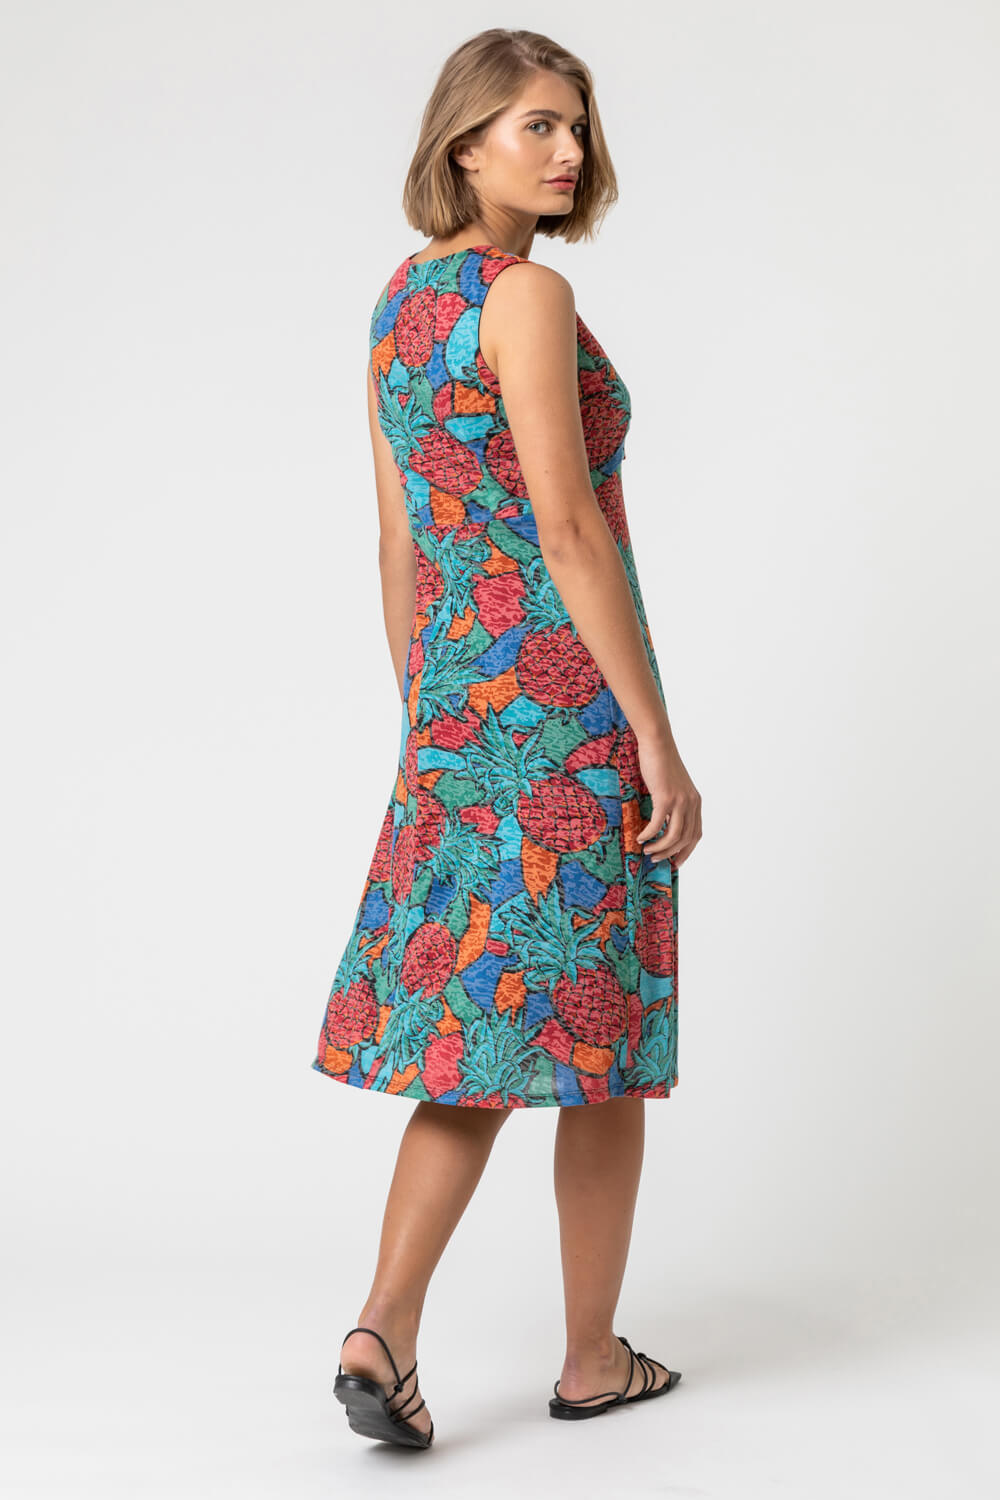 Turquoise Burnout Pineapple Print Knotted Dress, Image 2 of 4